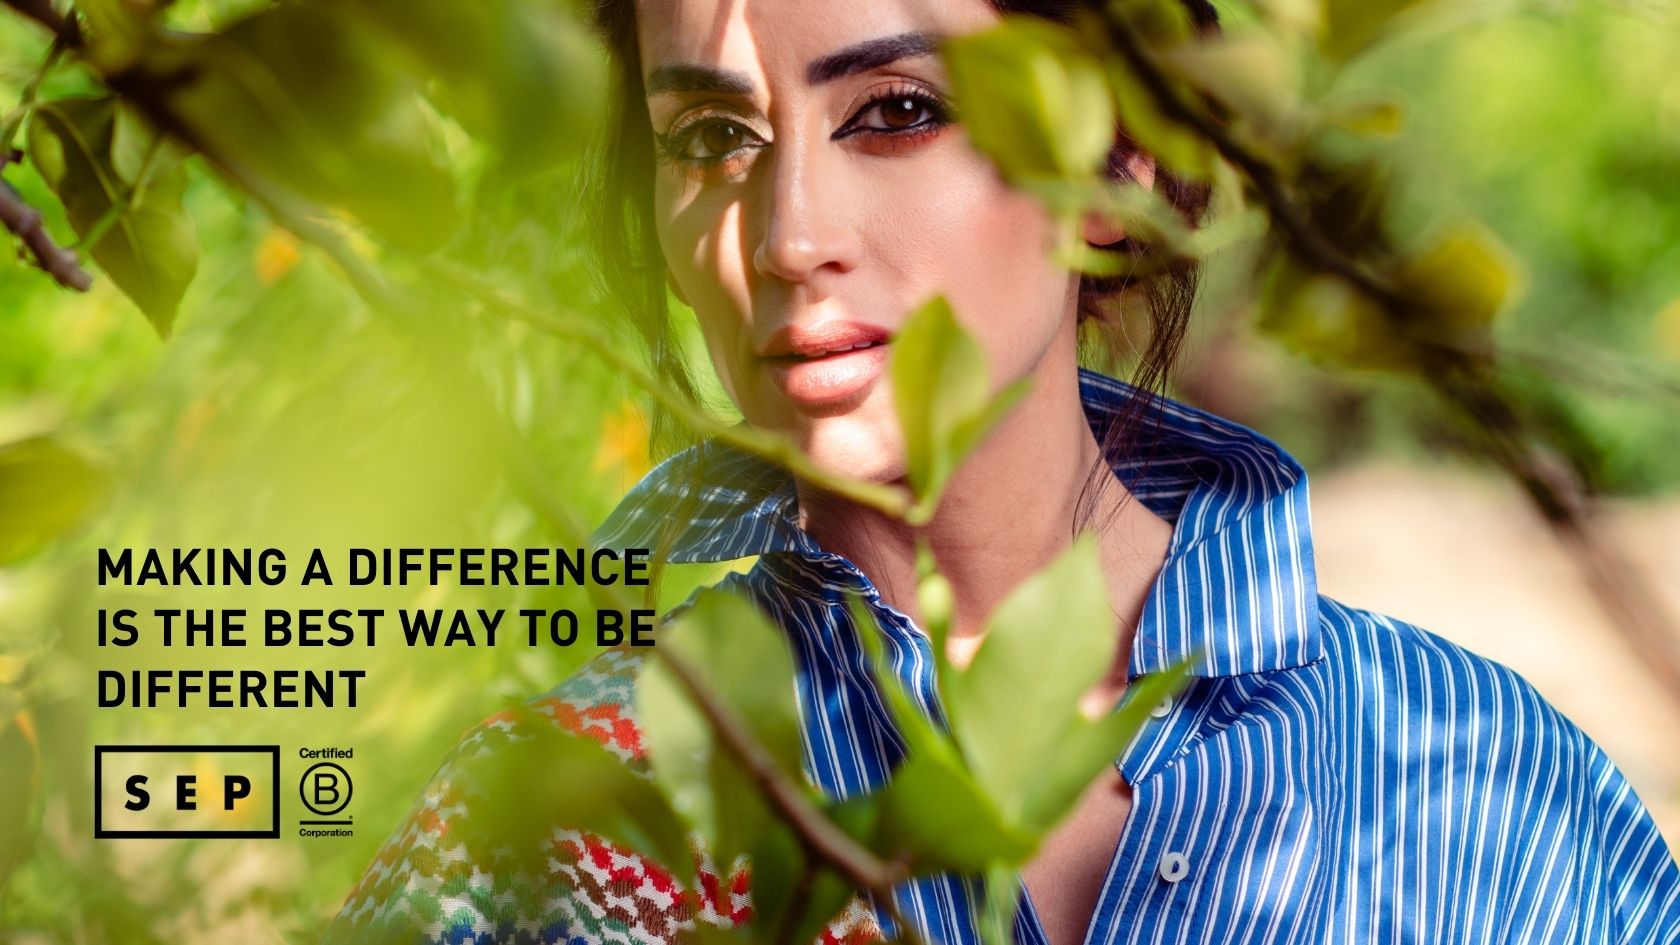 Making a difference is the best way to be different